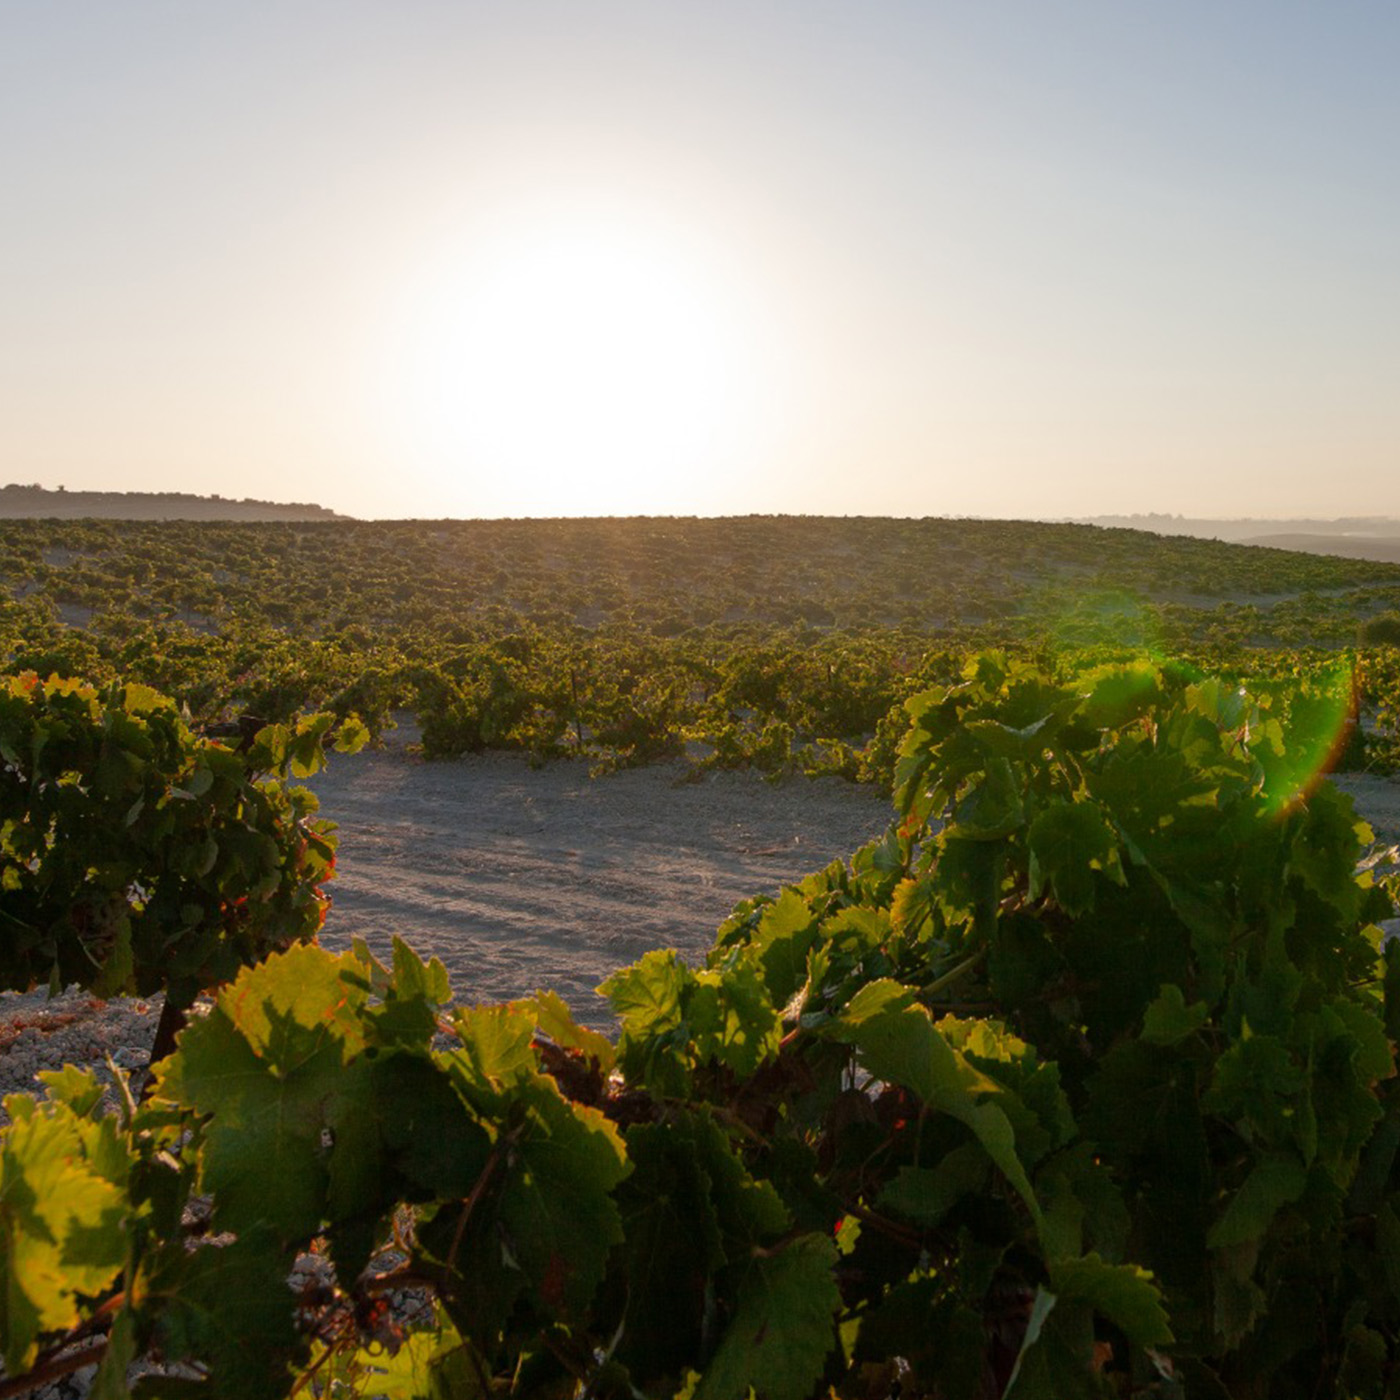 4x4 route through the vineyards of the Jerez area and winery 3 - Rutasiete